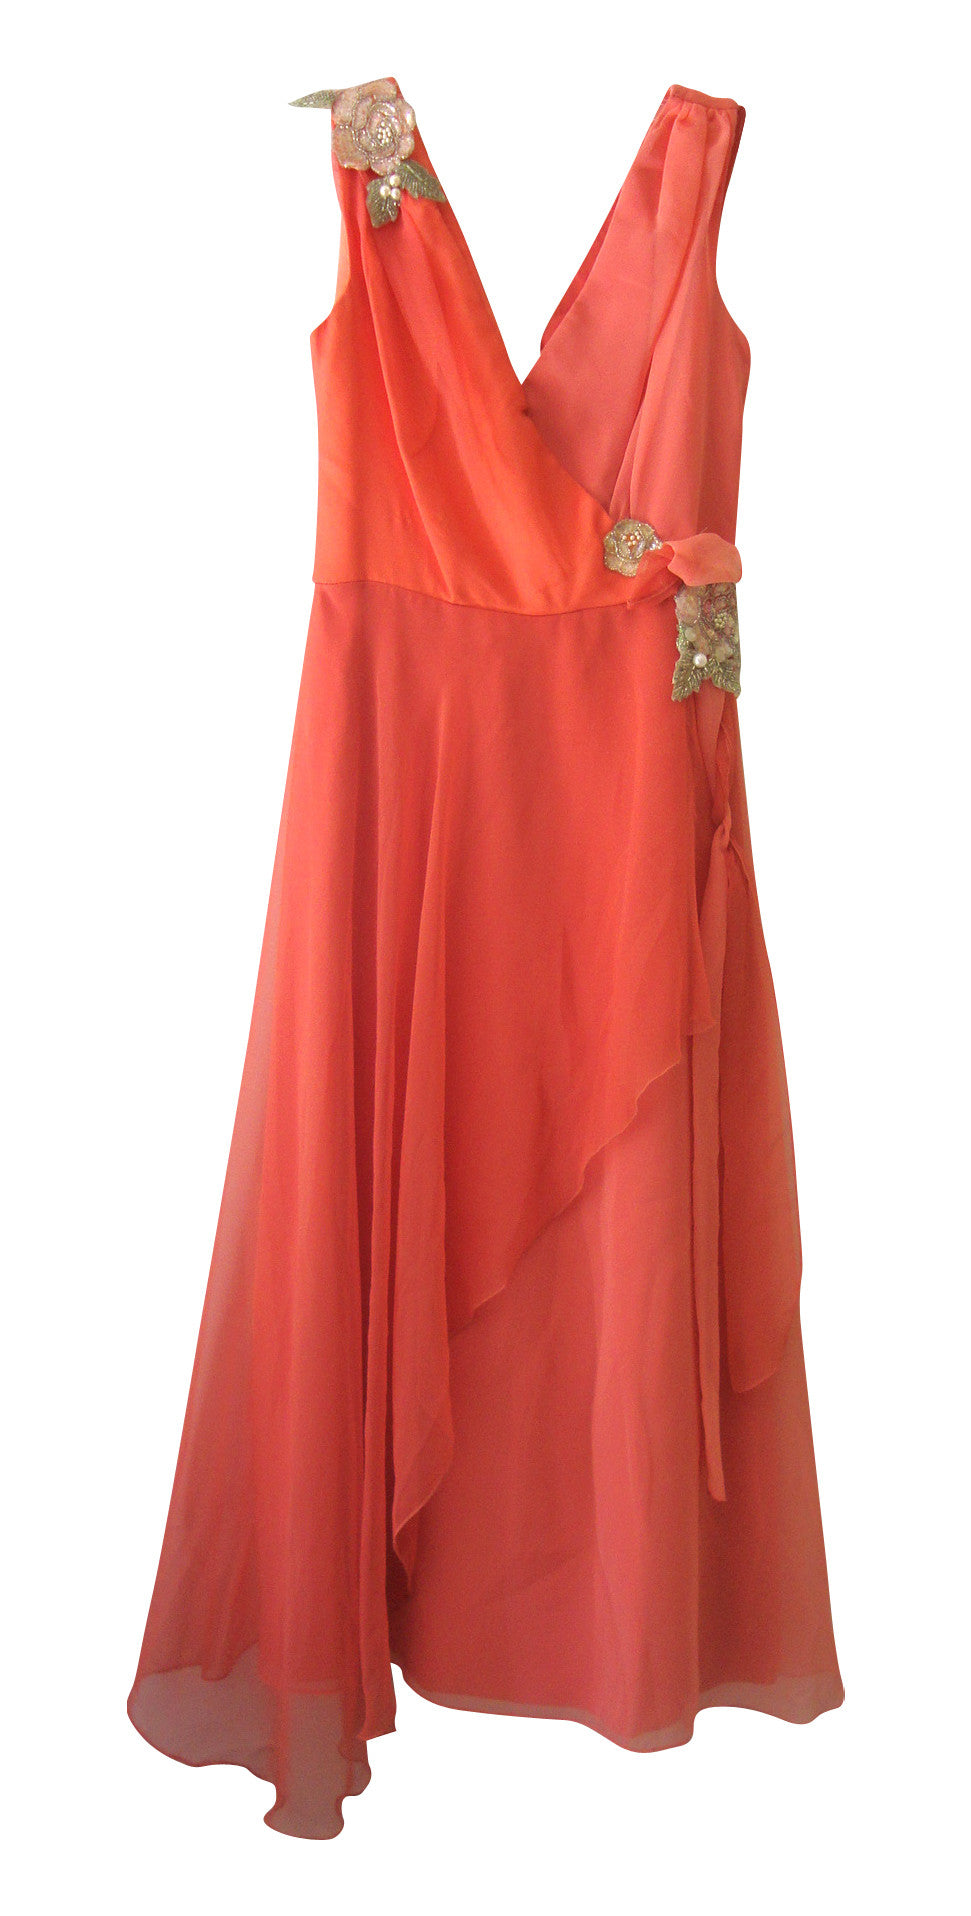 Vintage Bianchi Pink Peach Silver Sequin Grecian Layered Silky Dress Small 2 4 Ld-2708 Abby Essie